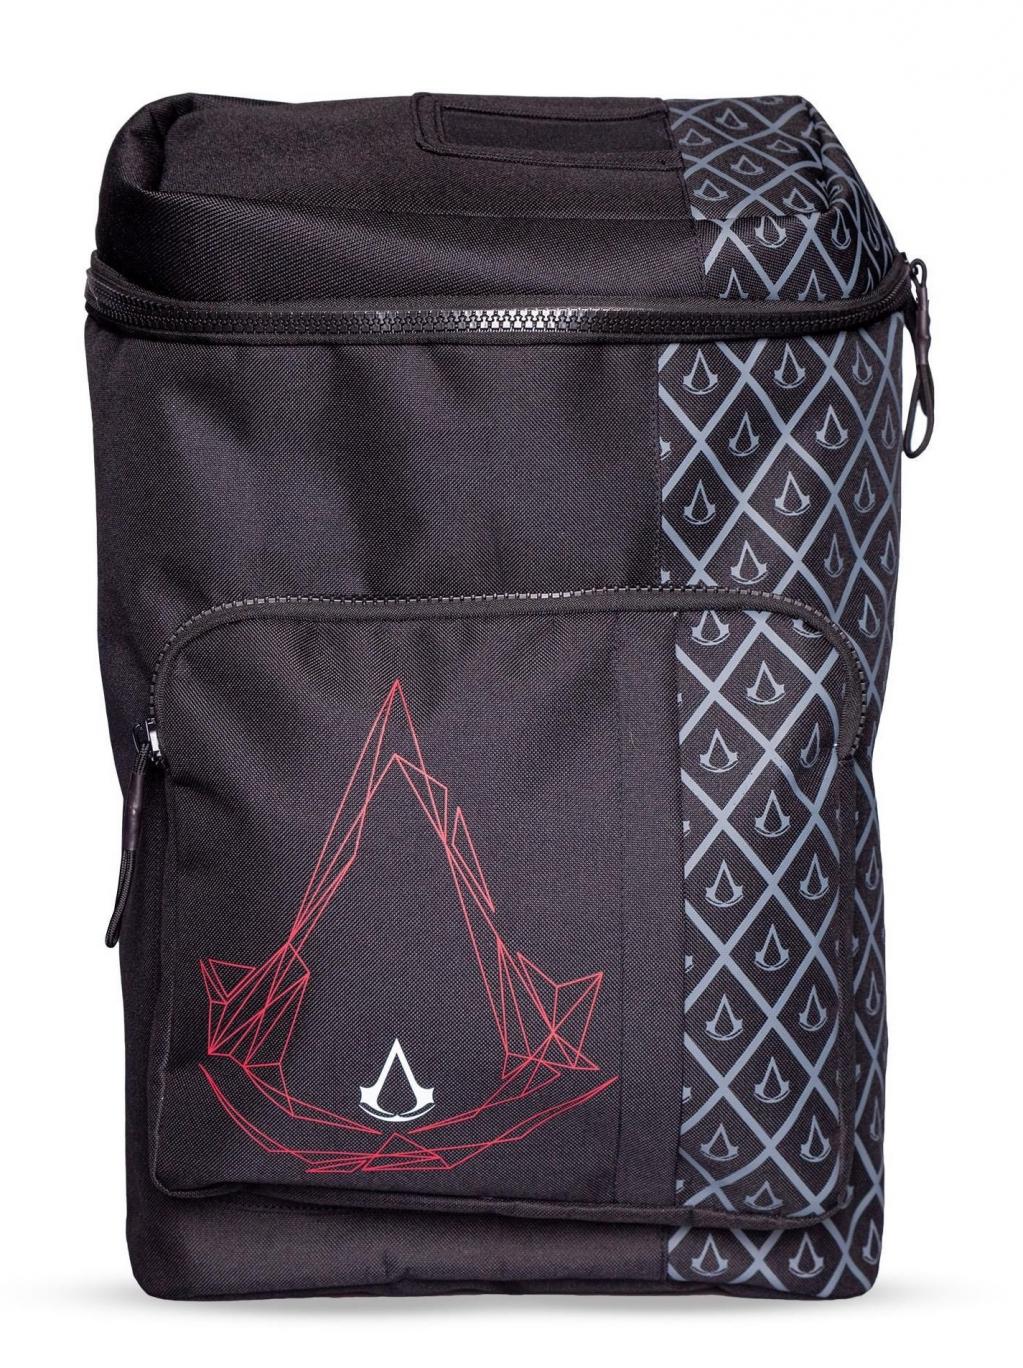 ASSASSIN'S CREED - Sac à Dos Deluxe